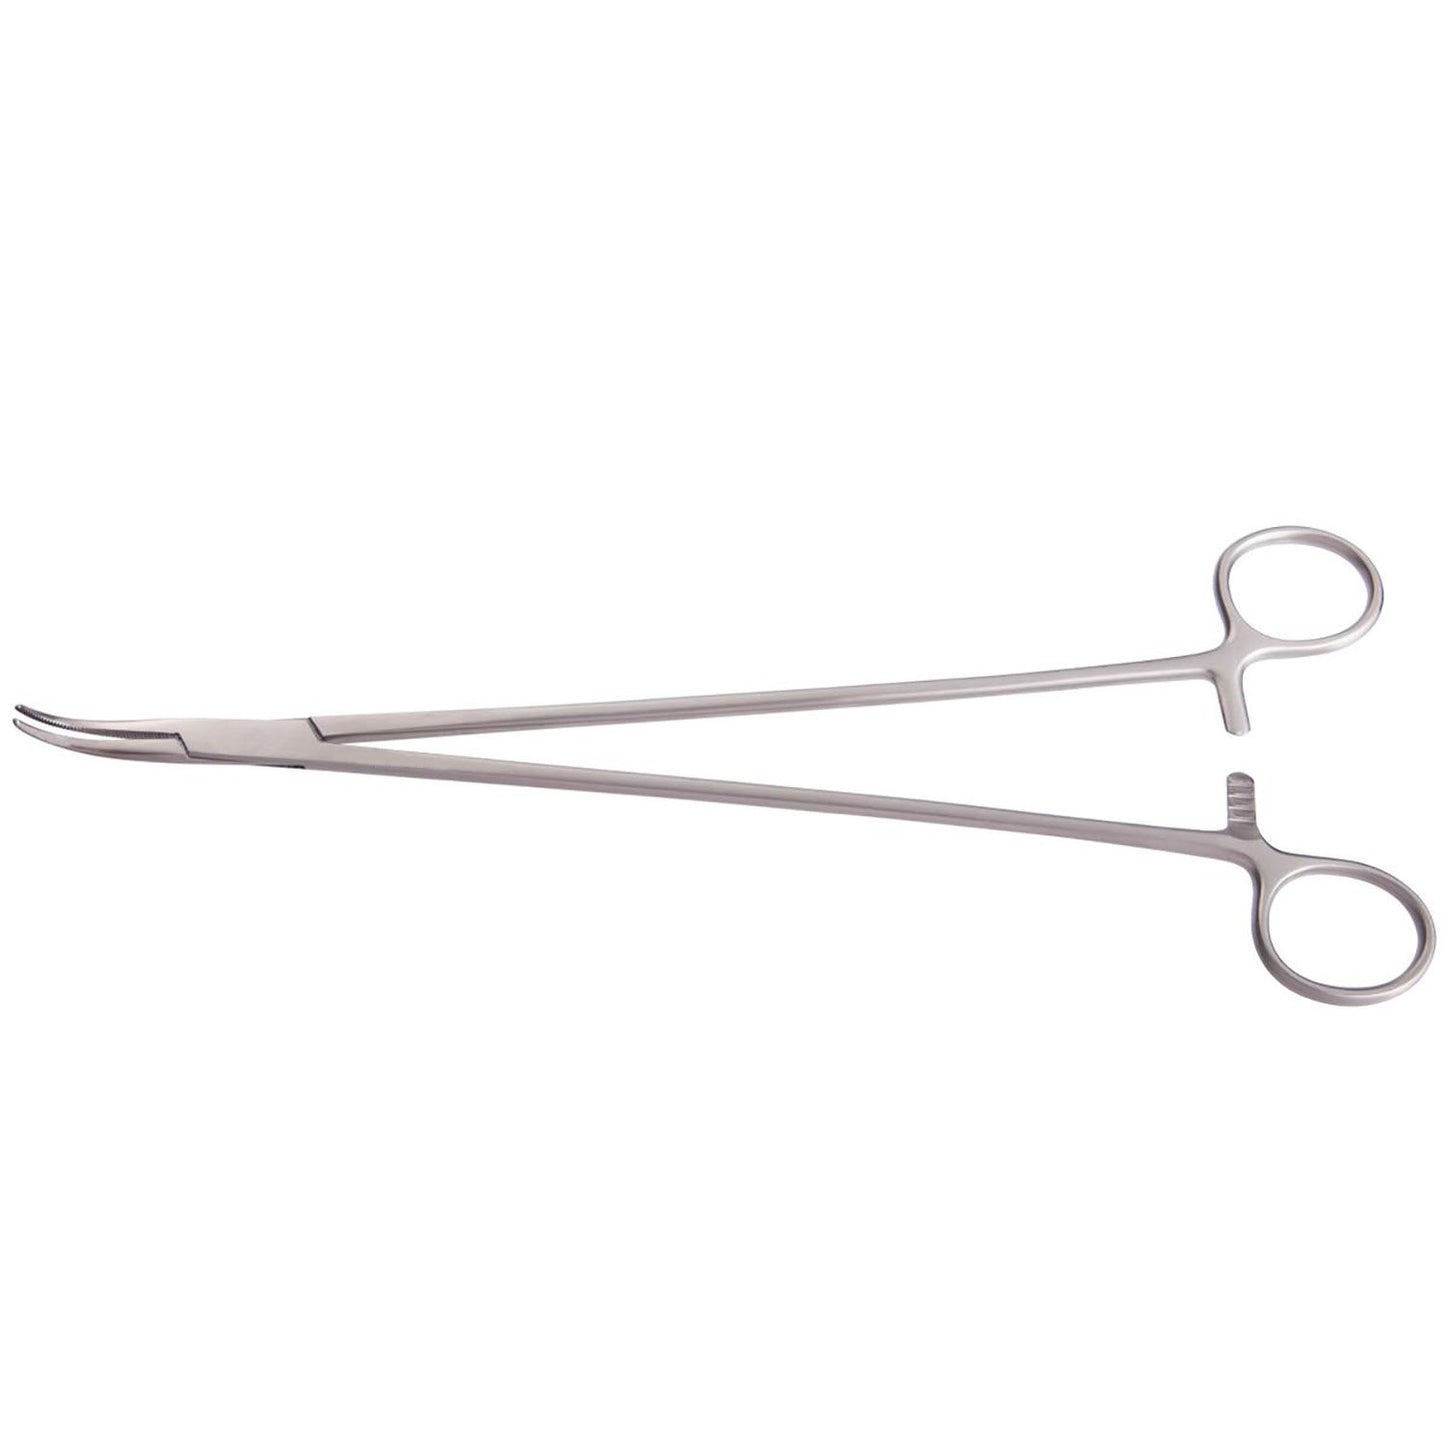 Lawrence Forceps Curved